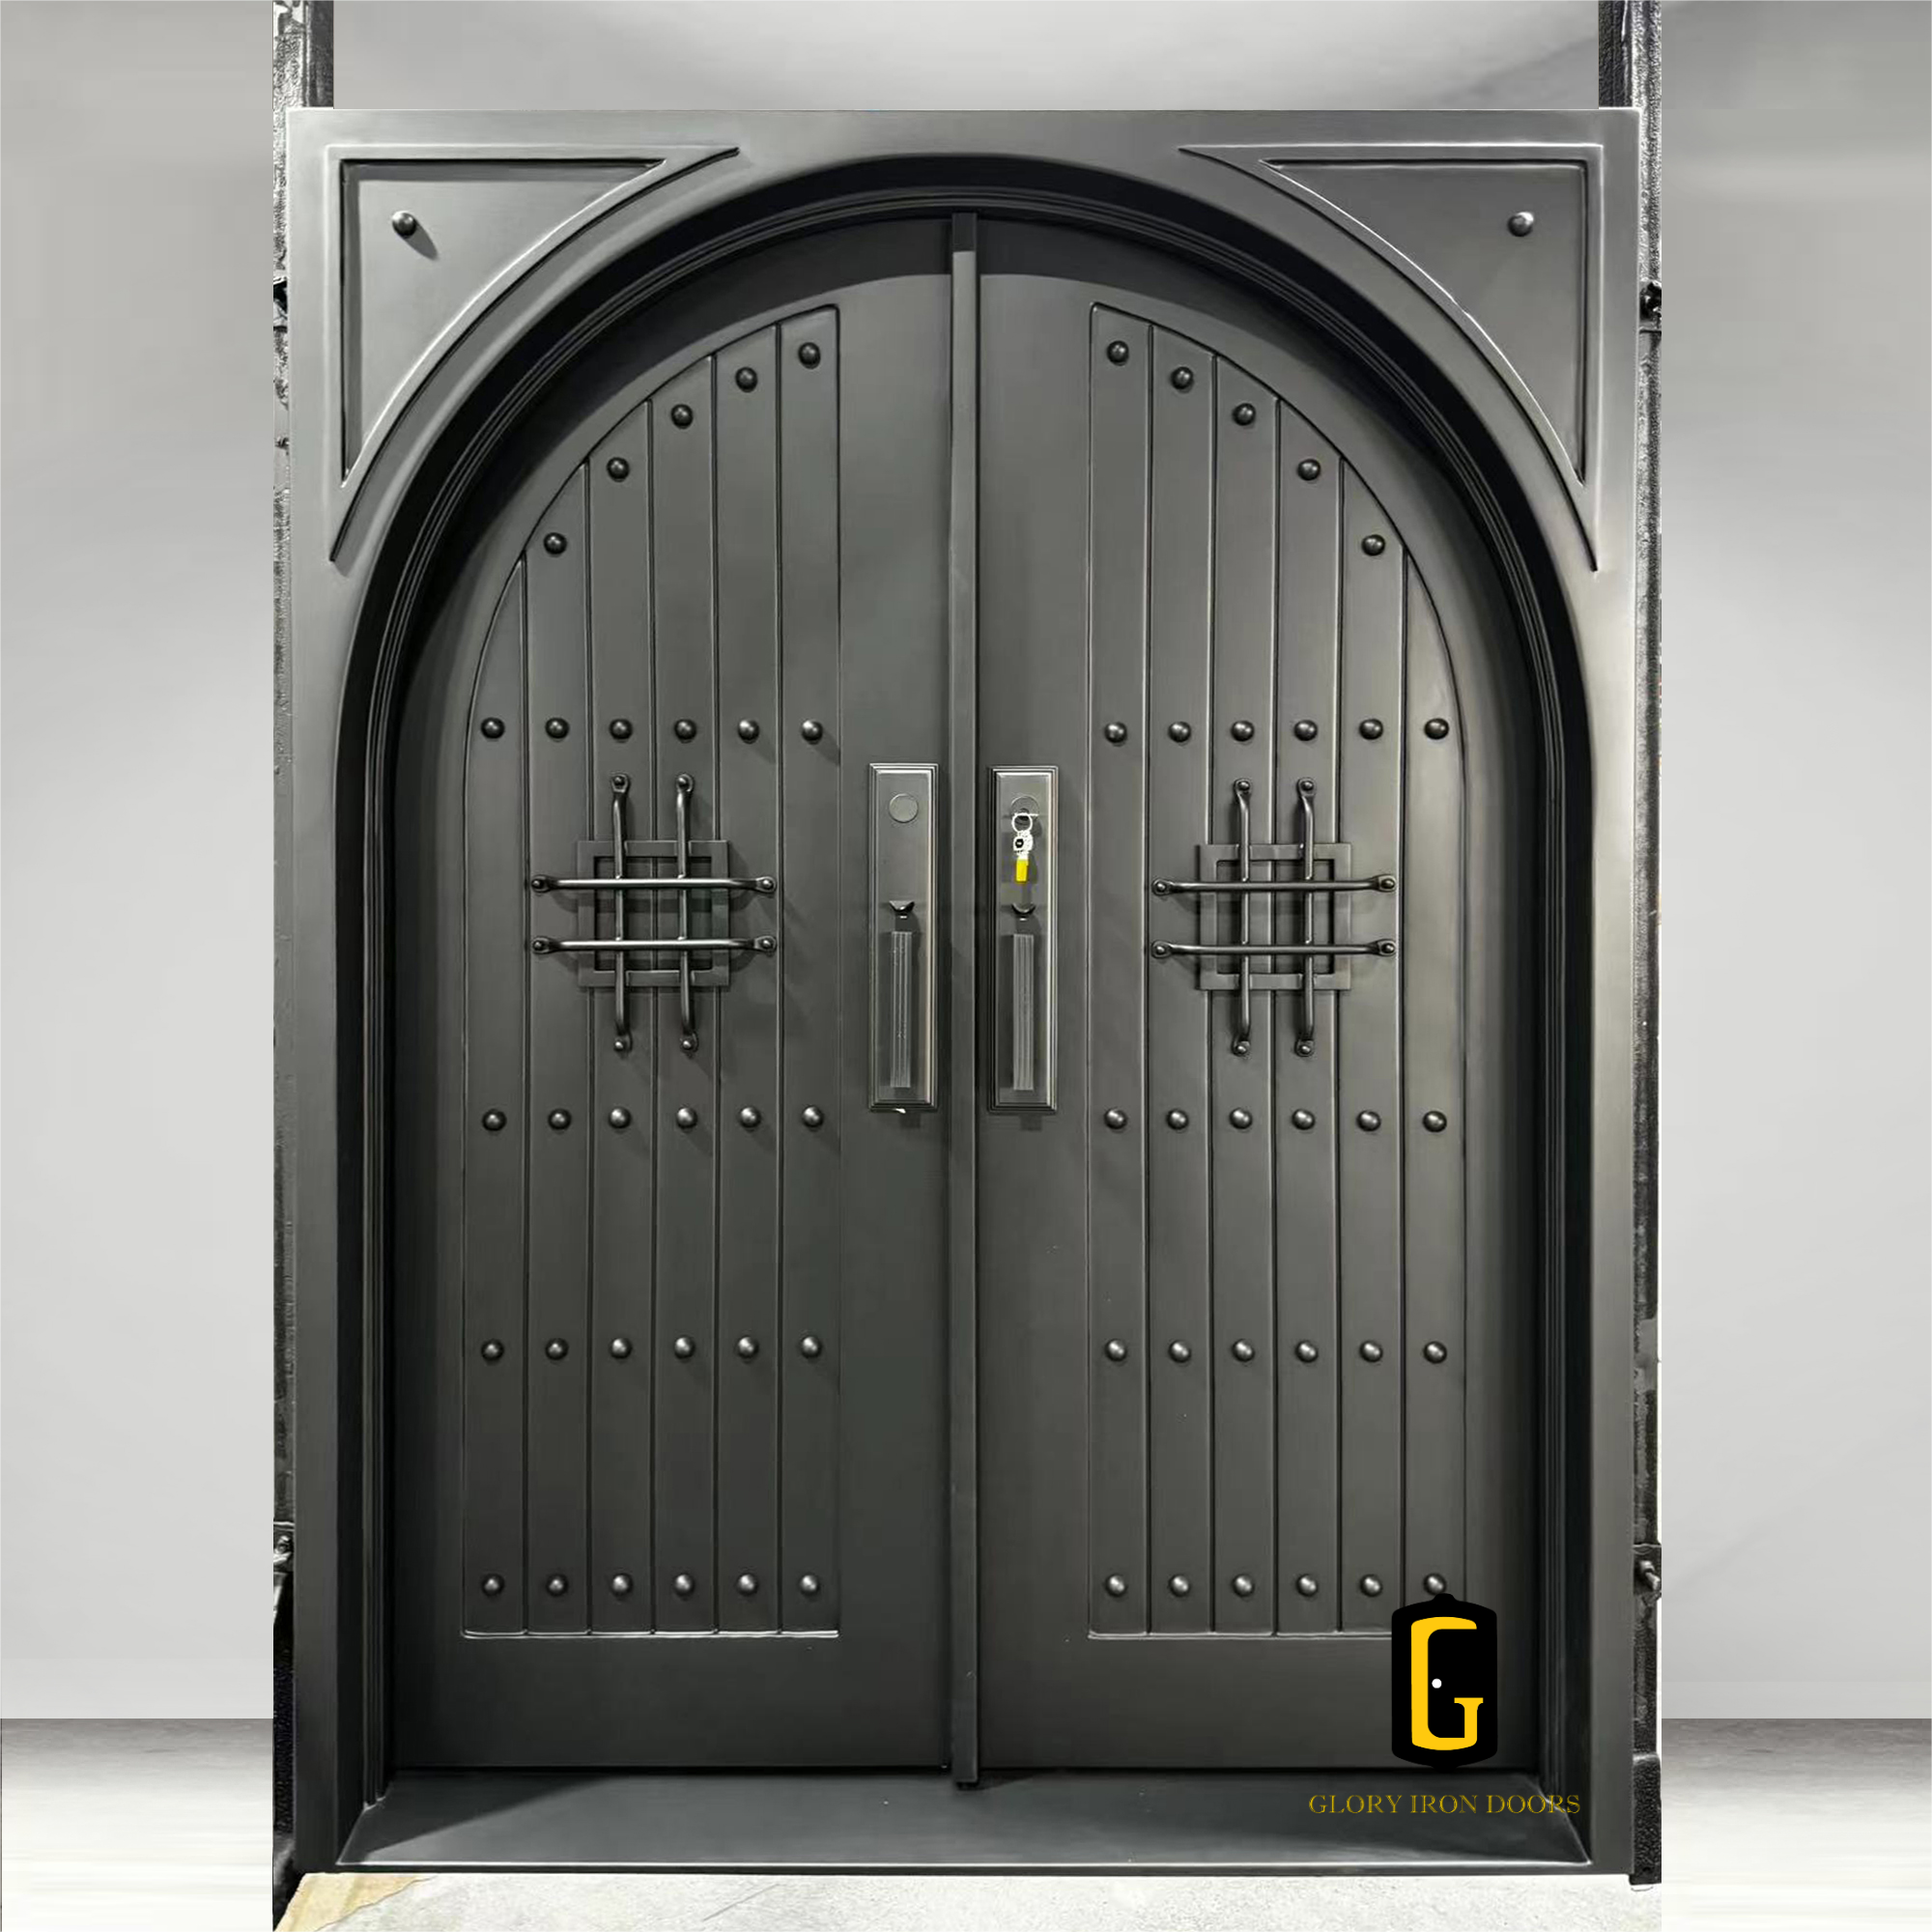 gloryirondoors handmade most secure full panel iron double door without glass 